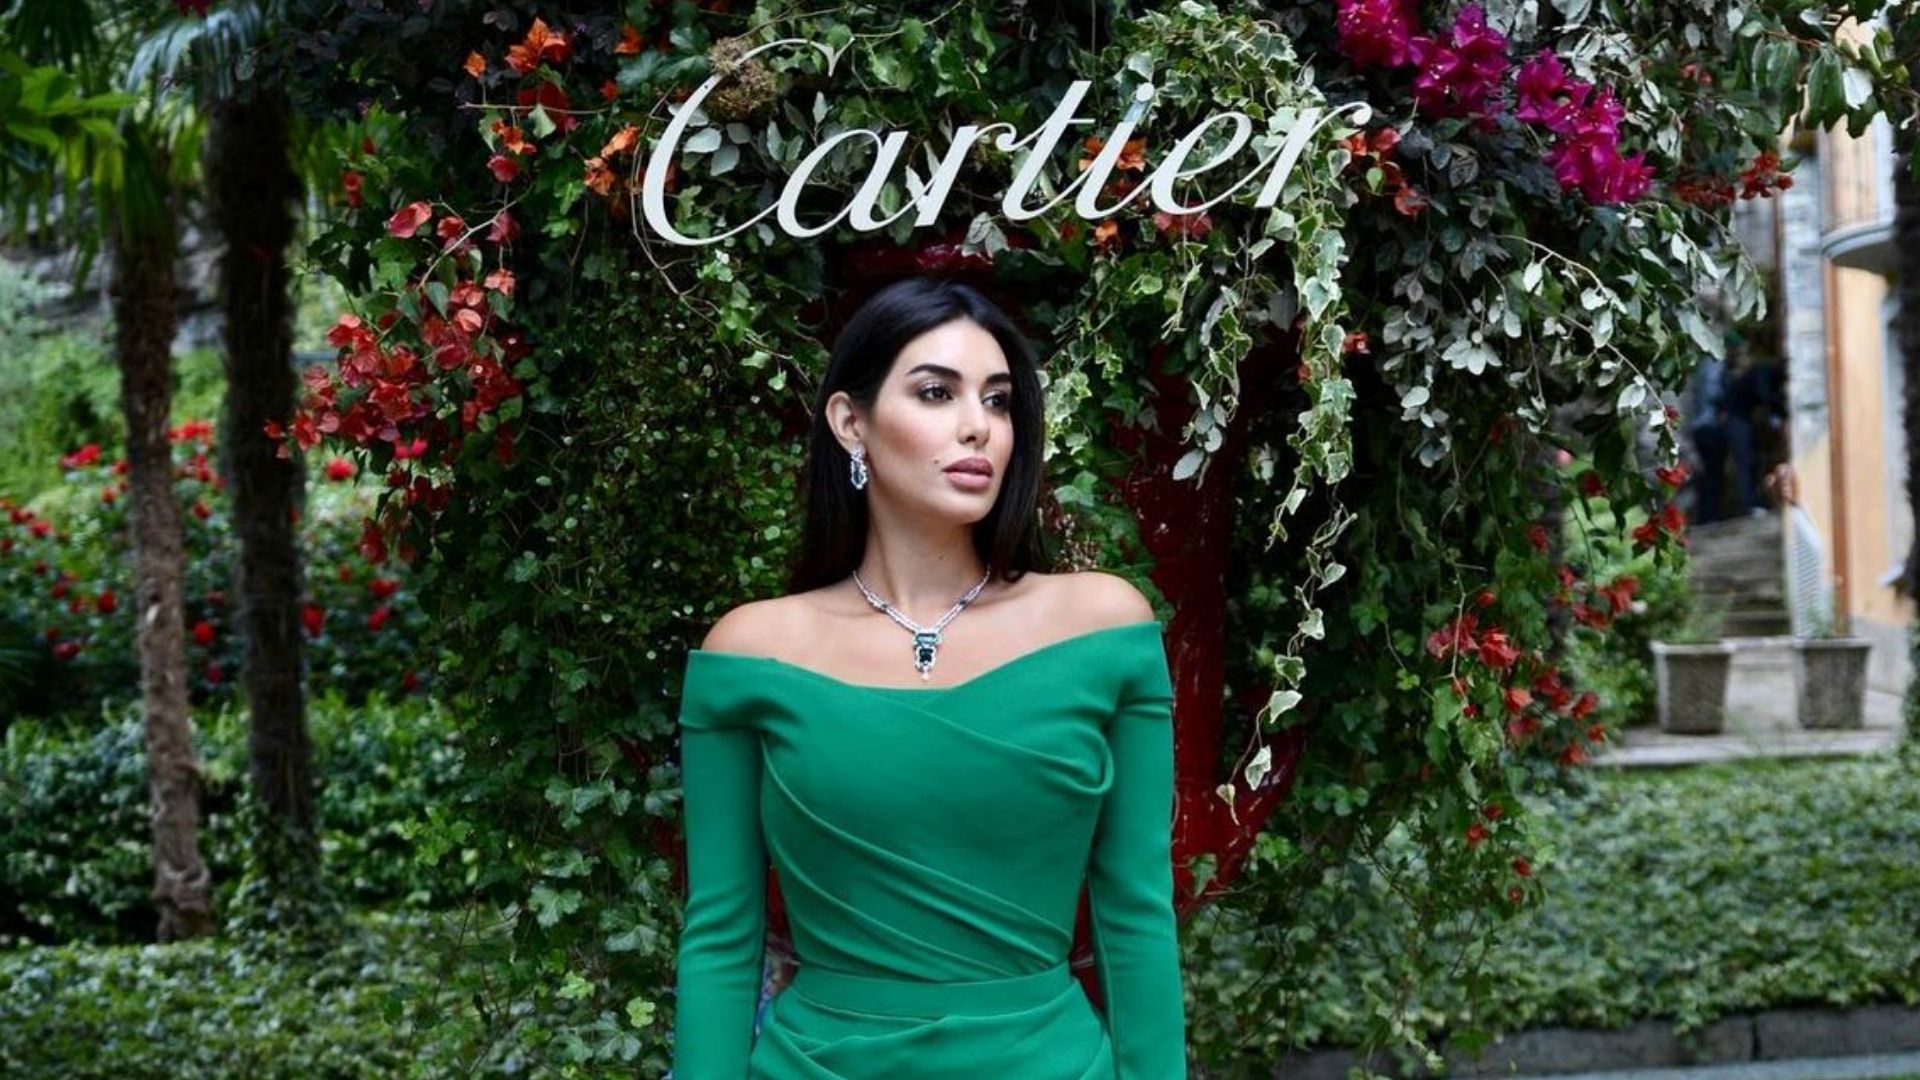 Yasmine Sabri is the Face of the New Panthère de Cartier Jewelry